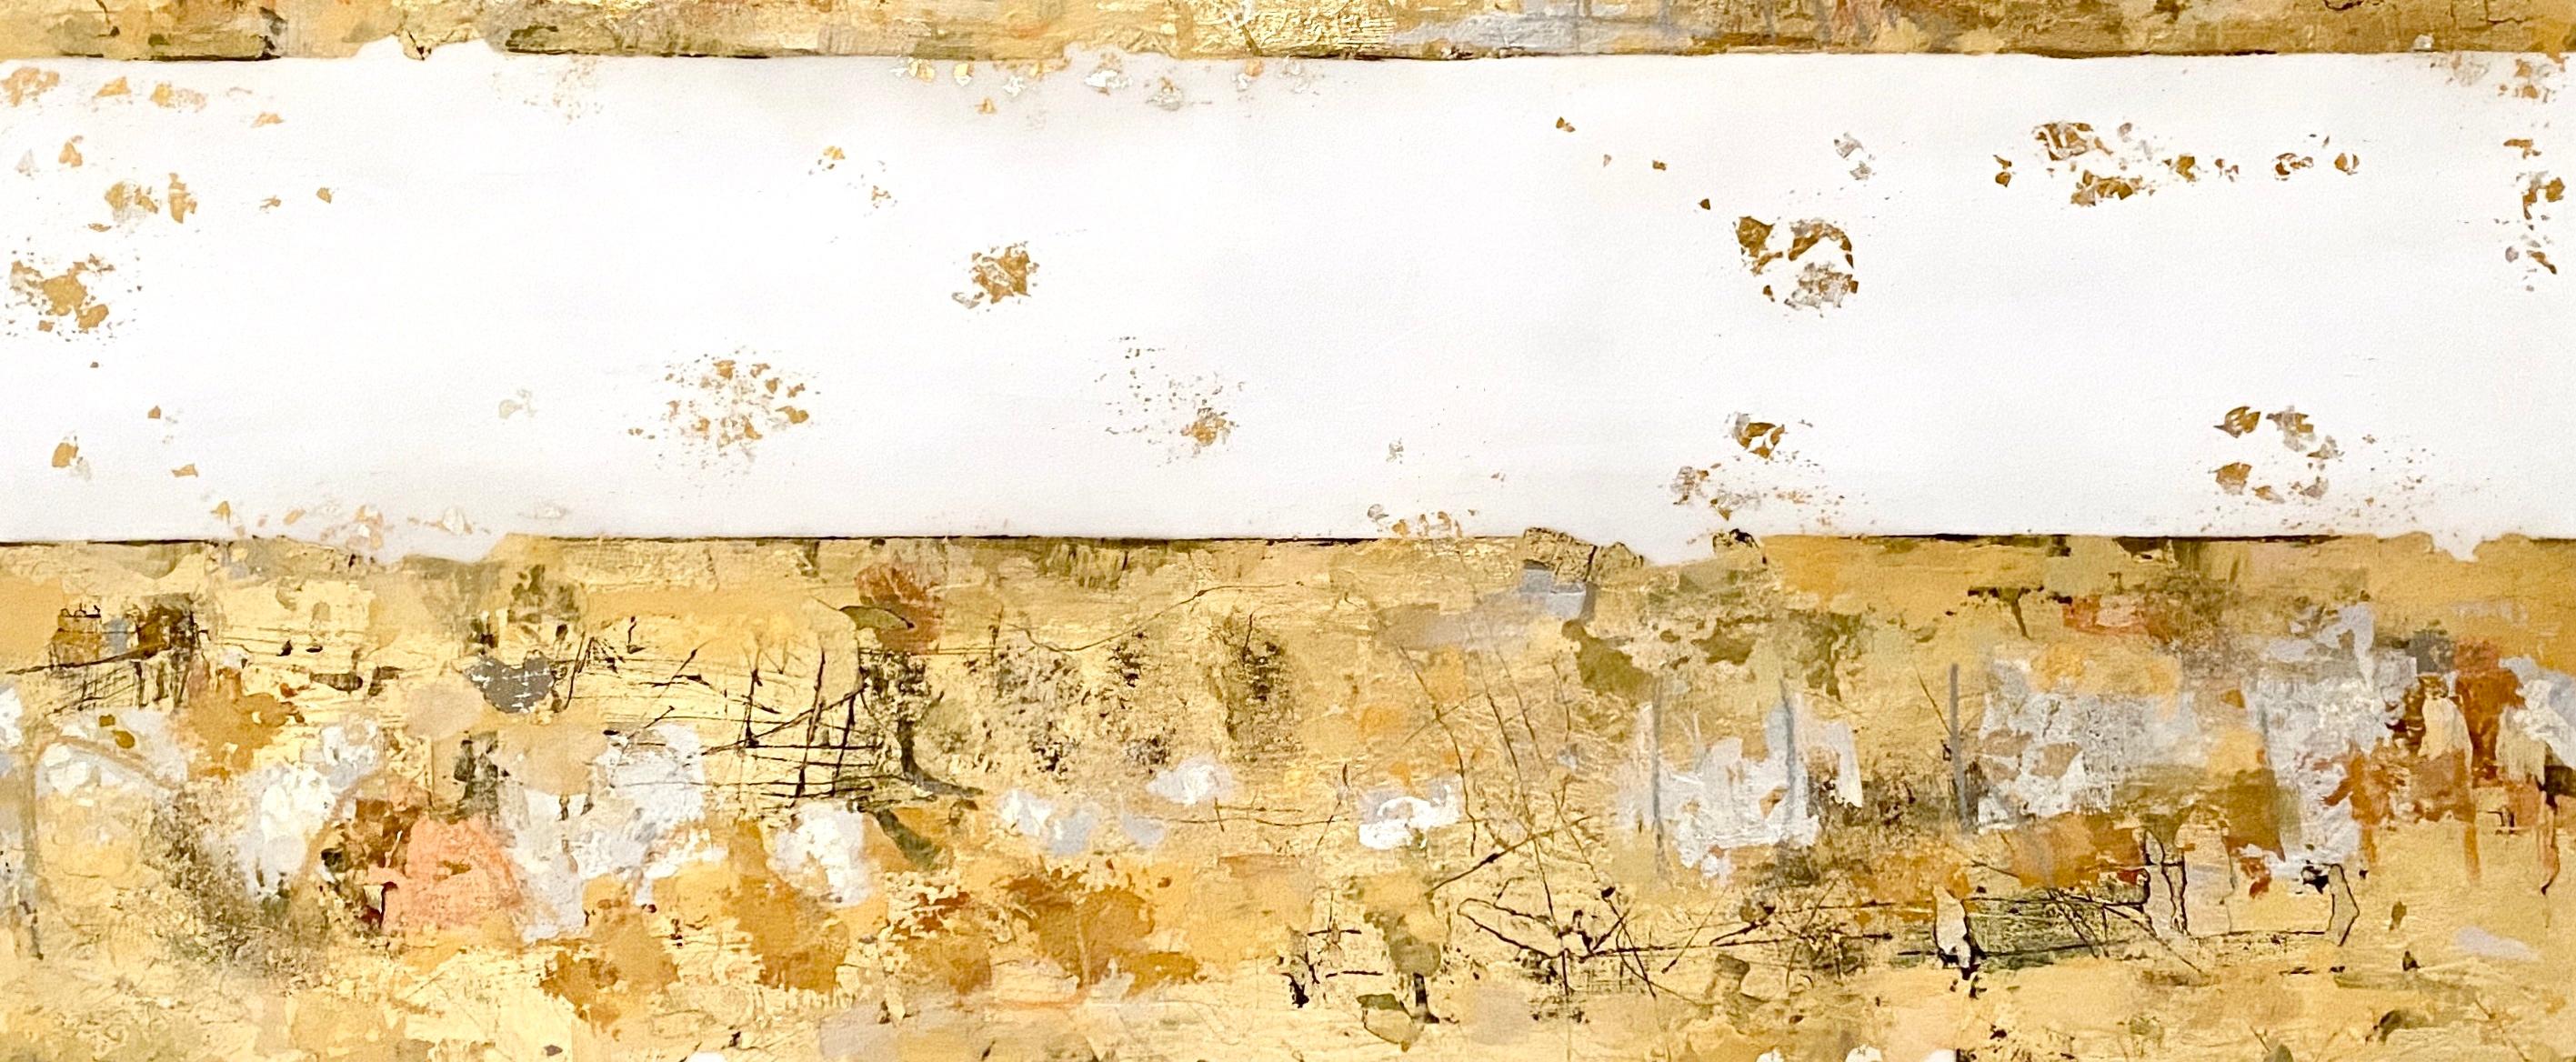 Lines No. 10 - Gold Abstract Painting by Takefumi Hori